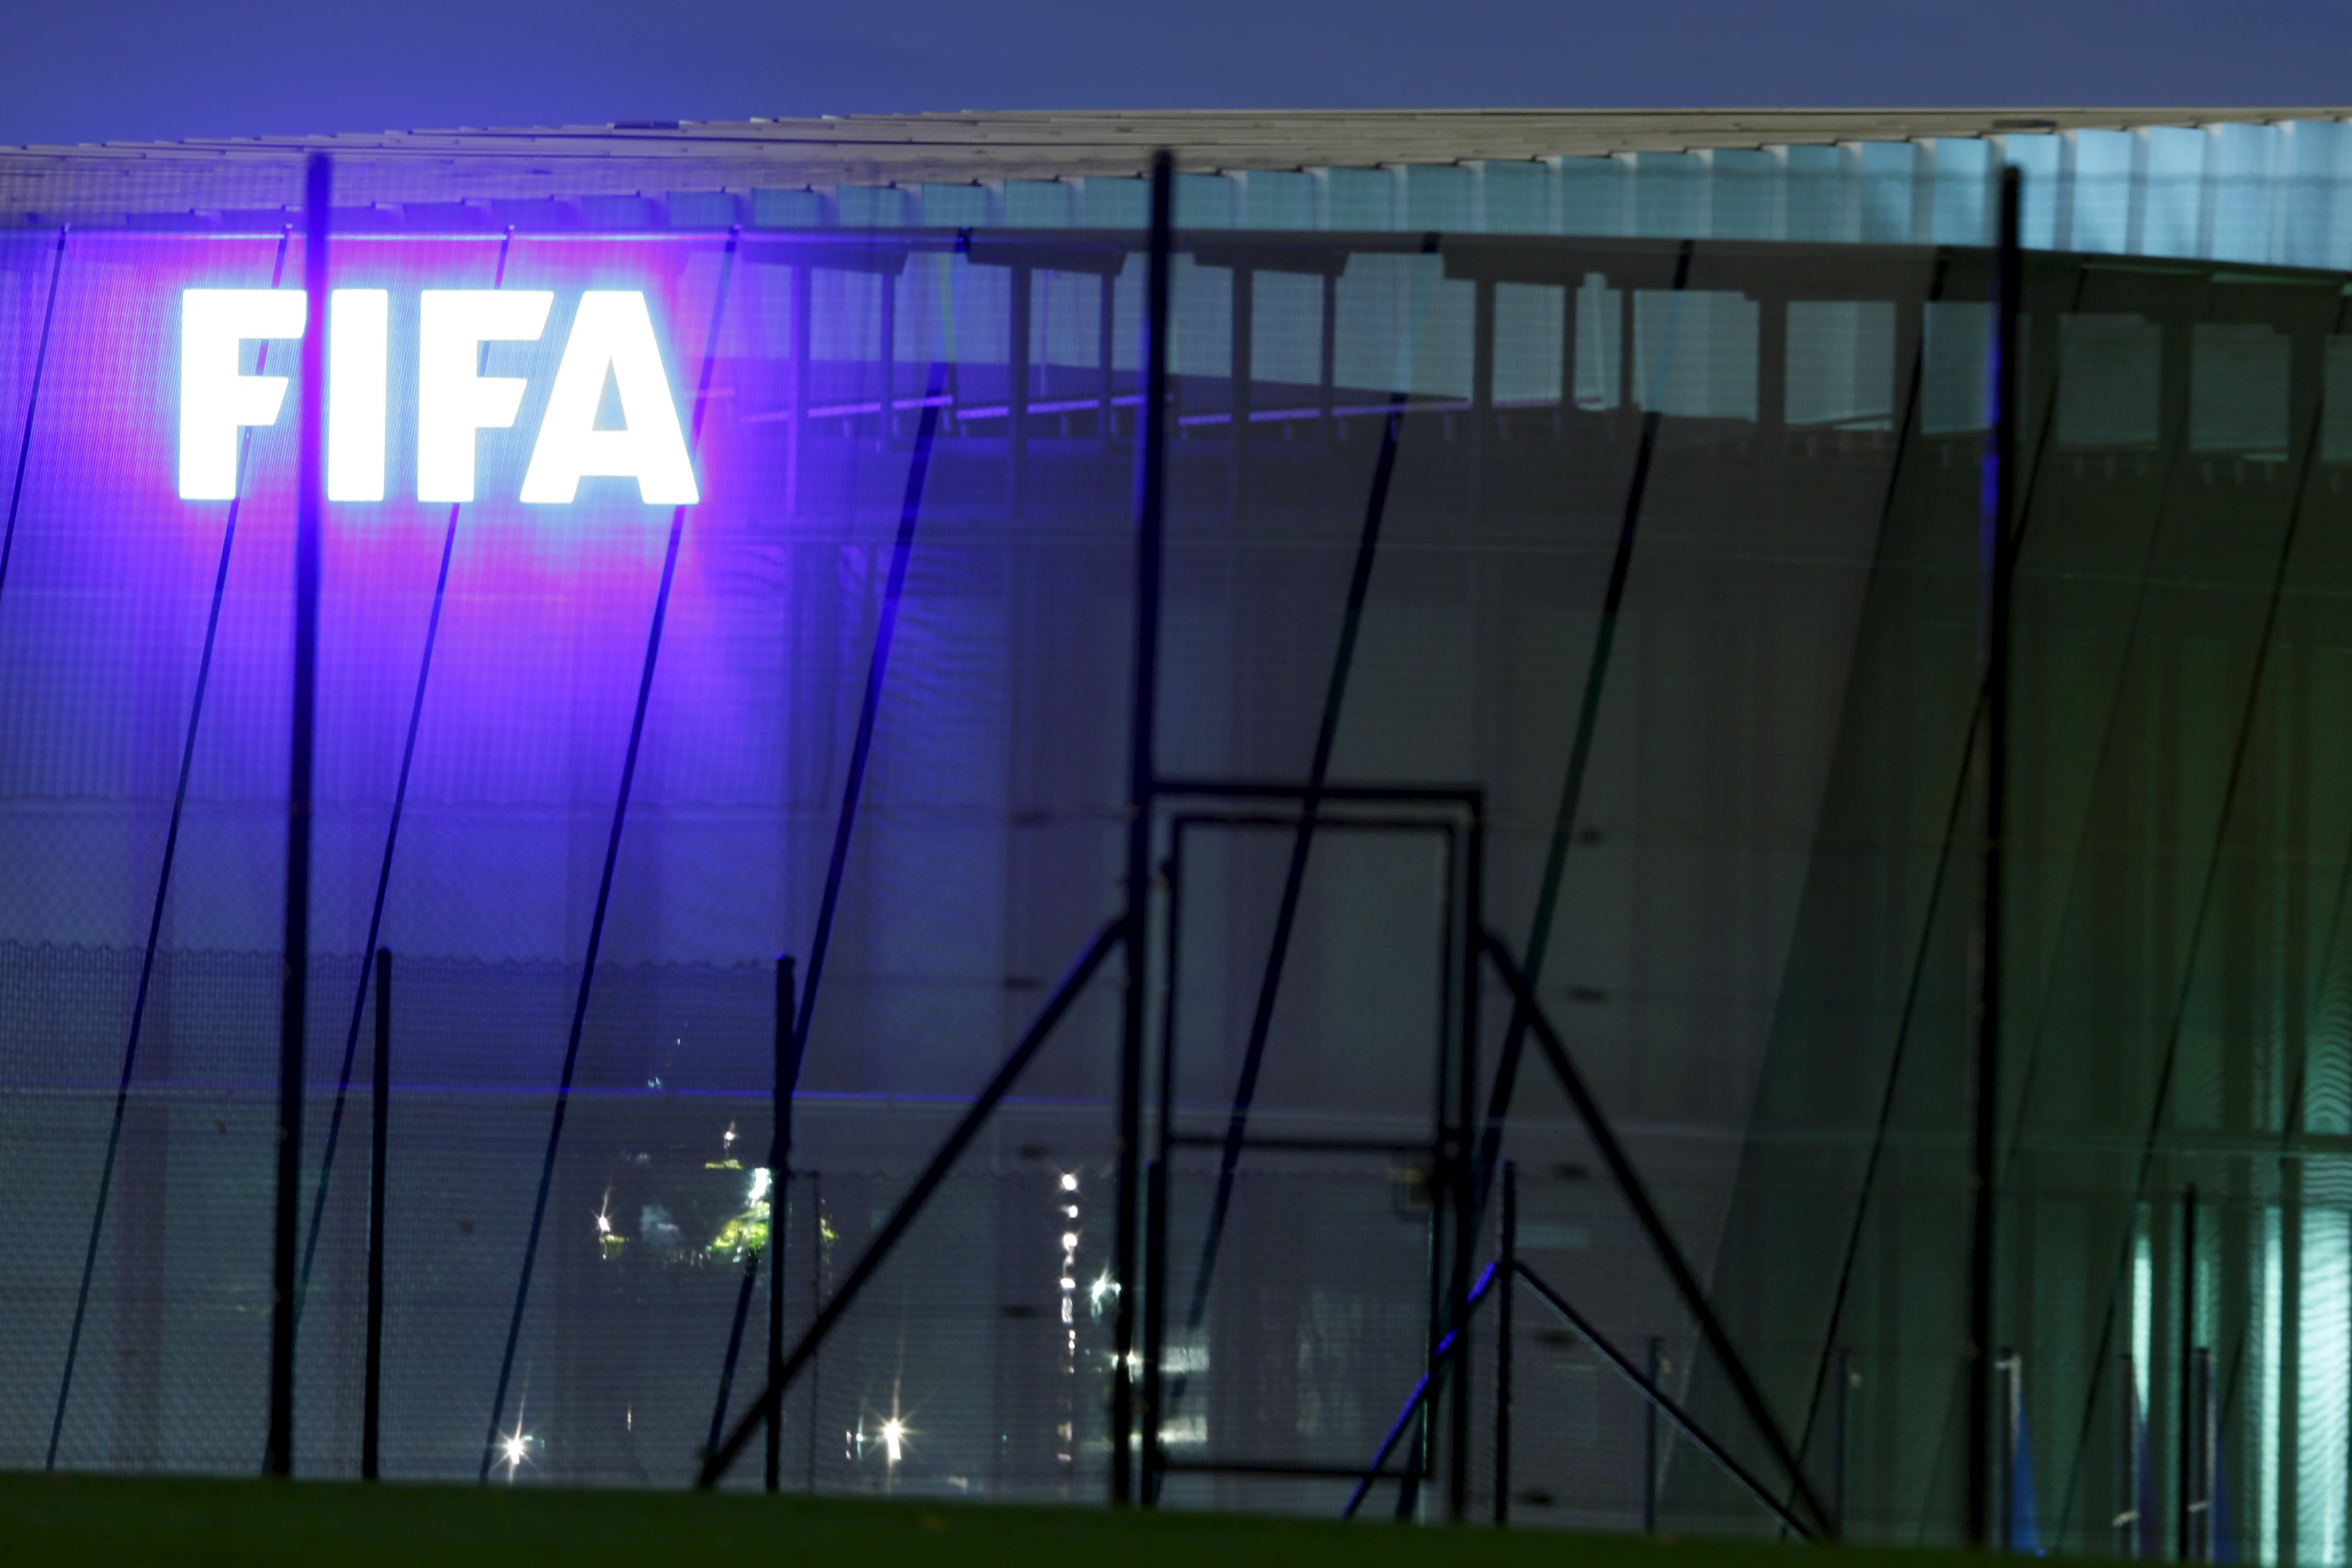 The FIFA logo is seen outside their headquarters in Zurich October 7, 2015. FIFA president Sepp Blatter faces a 90 day suspension from football if the governing body's Ethics judge backs a prosecutor's recommendation, a close friend and former advisor to Blatter told Reuters on Wednesday. Blatter's long-term confidant Klaus Stoehlker said the decision by judge Hans-Joachim Eckert was expected by Friday. Reuters was unable to confirm the information with FIFA's Ethics Committee or with FIFA itself. REUTERS/Arnd Wiegmann